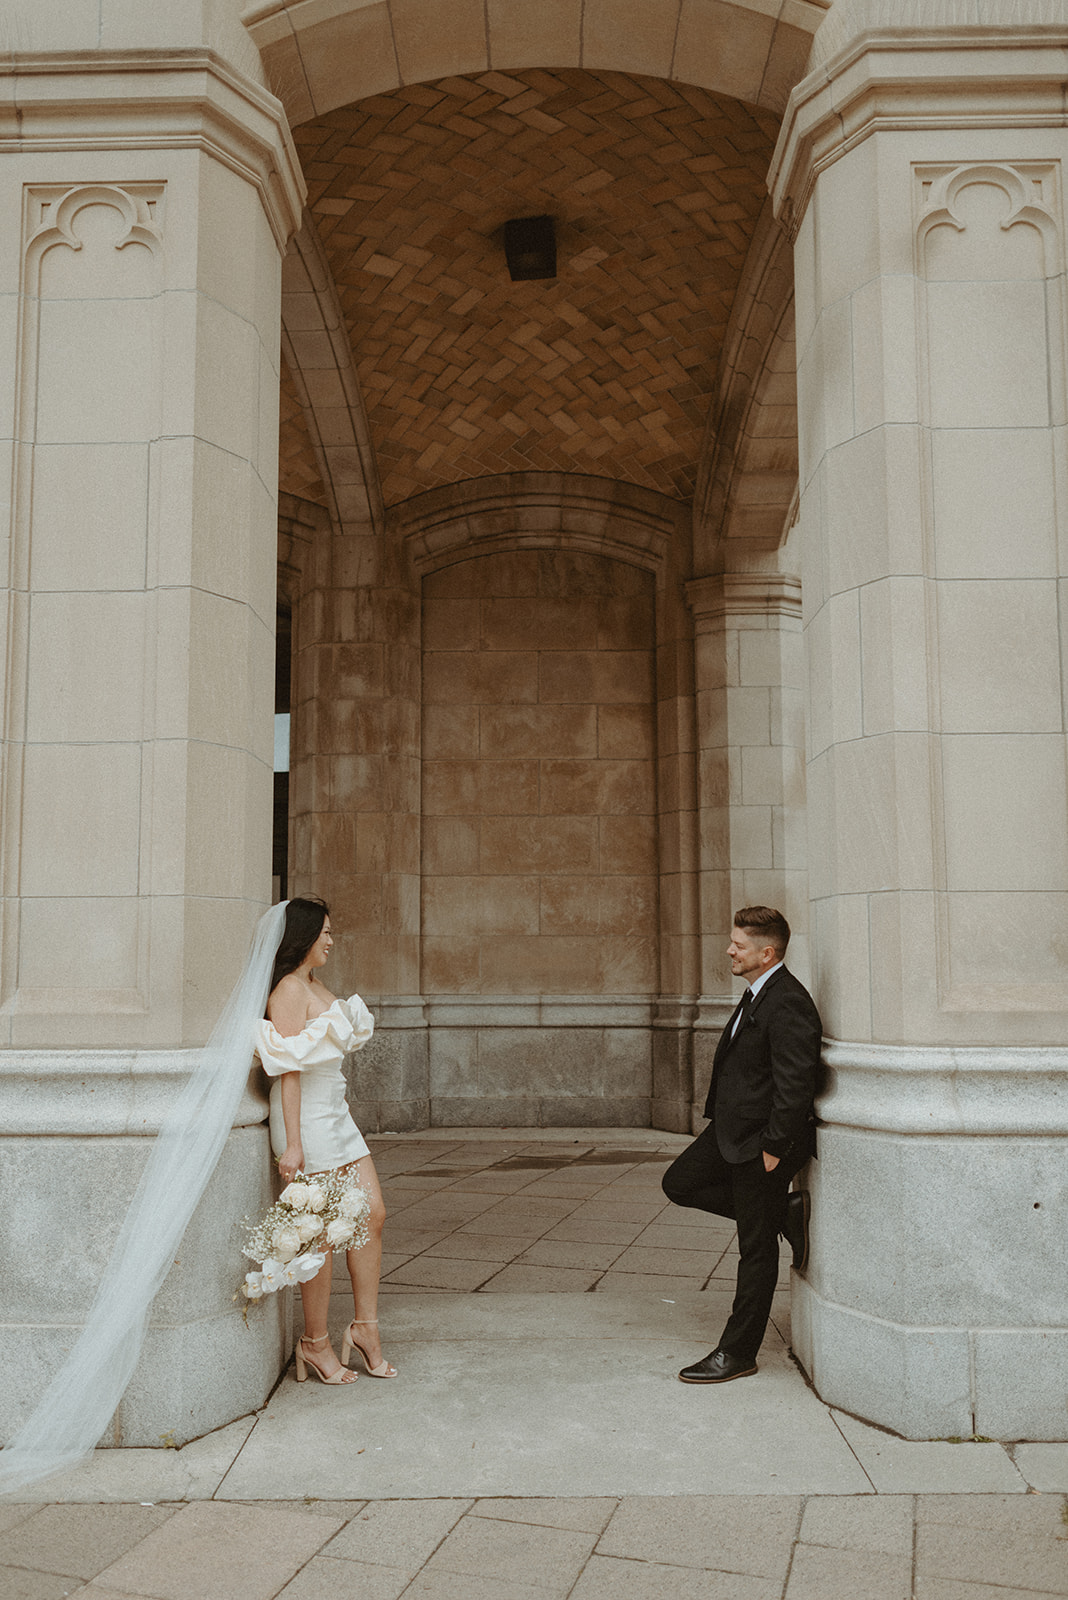 Classic wedding photography at Fairmont Chateau Laurier